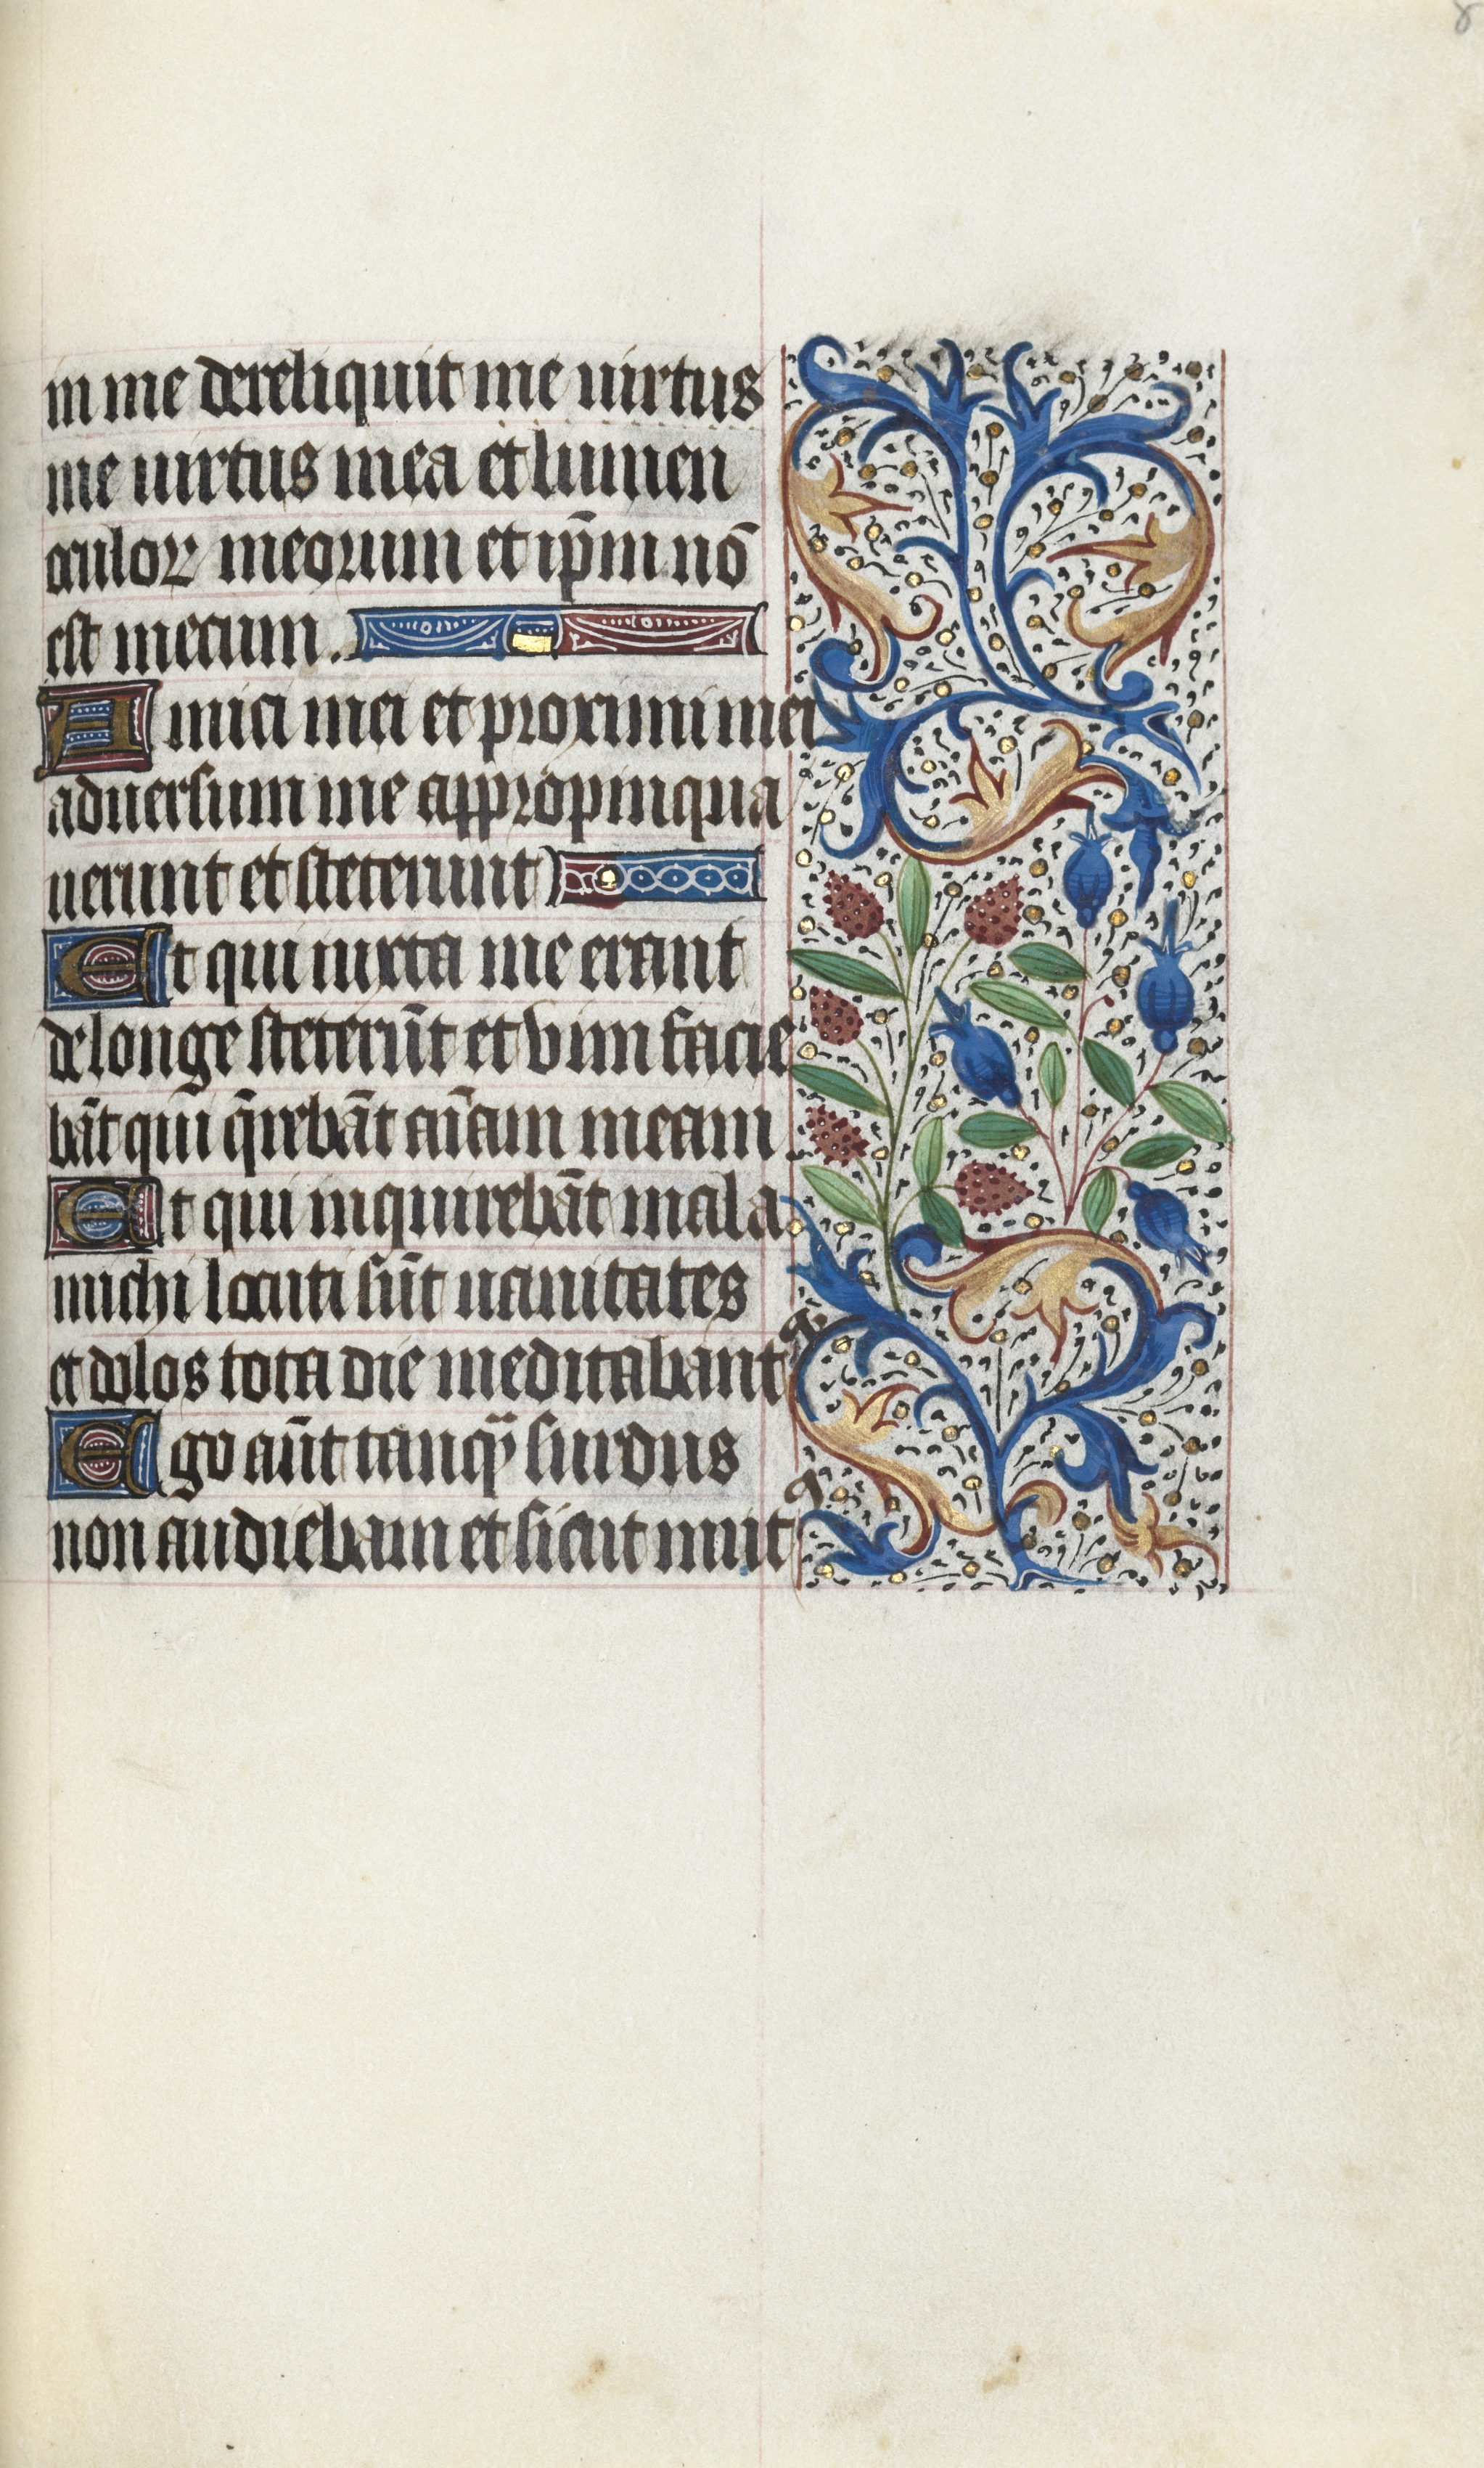 Book of Hours (Use of Rouen): fol. 84r